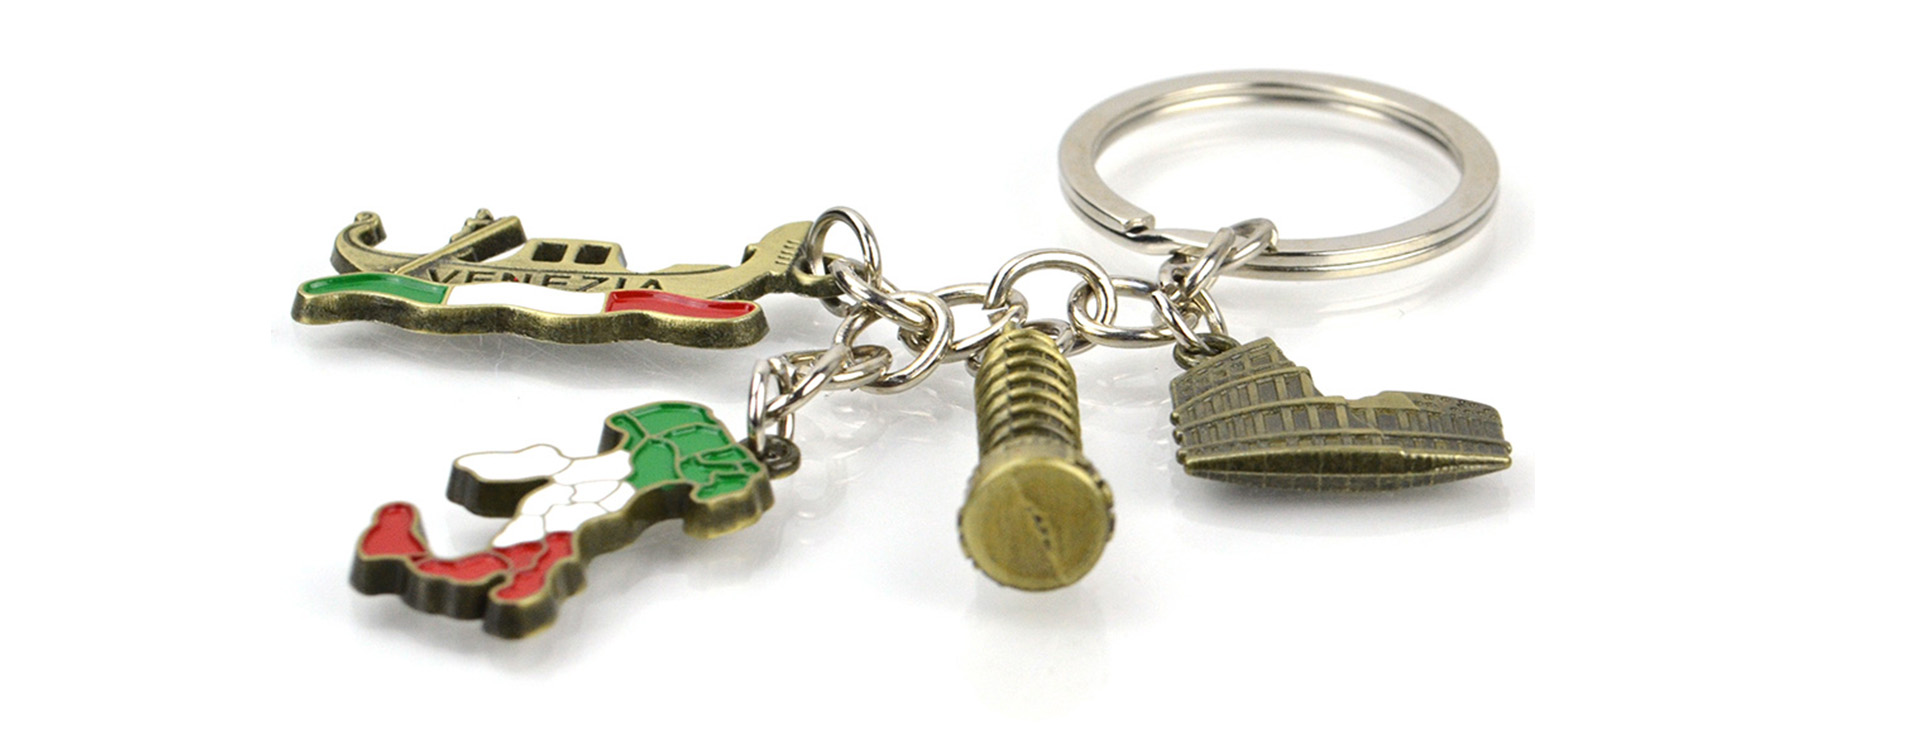 ArtiGifts - Elevate Your Style with Custom Metal Keychains of Distinction